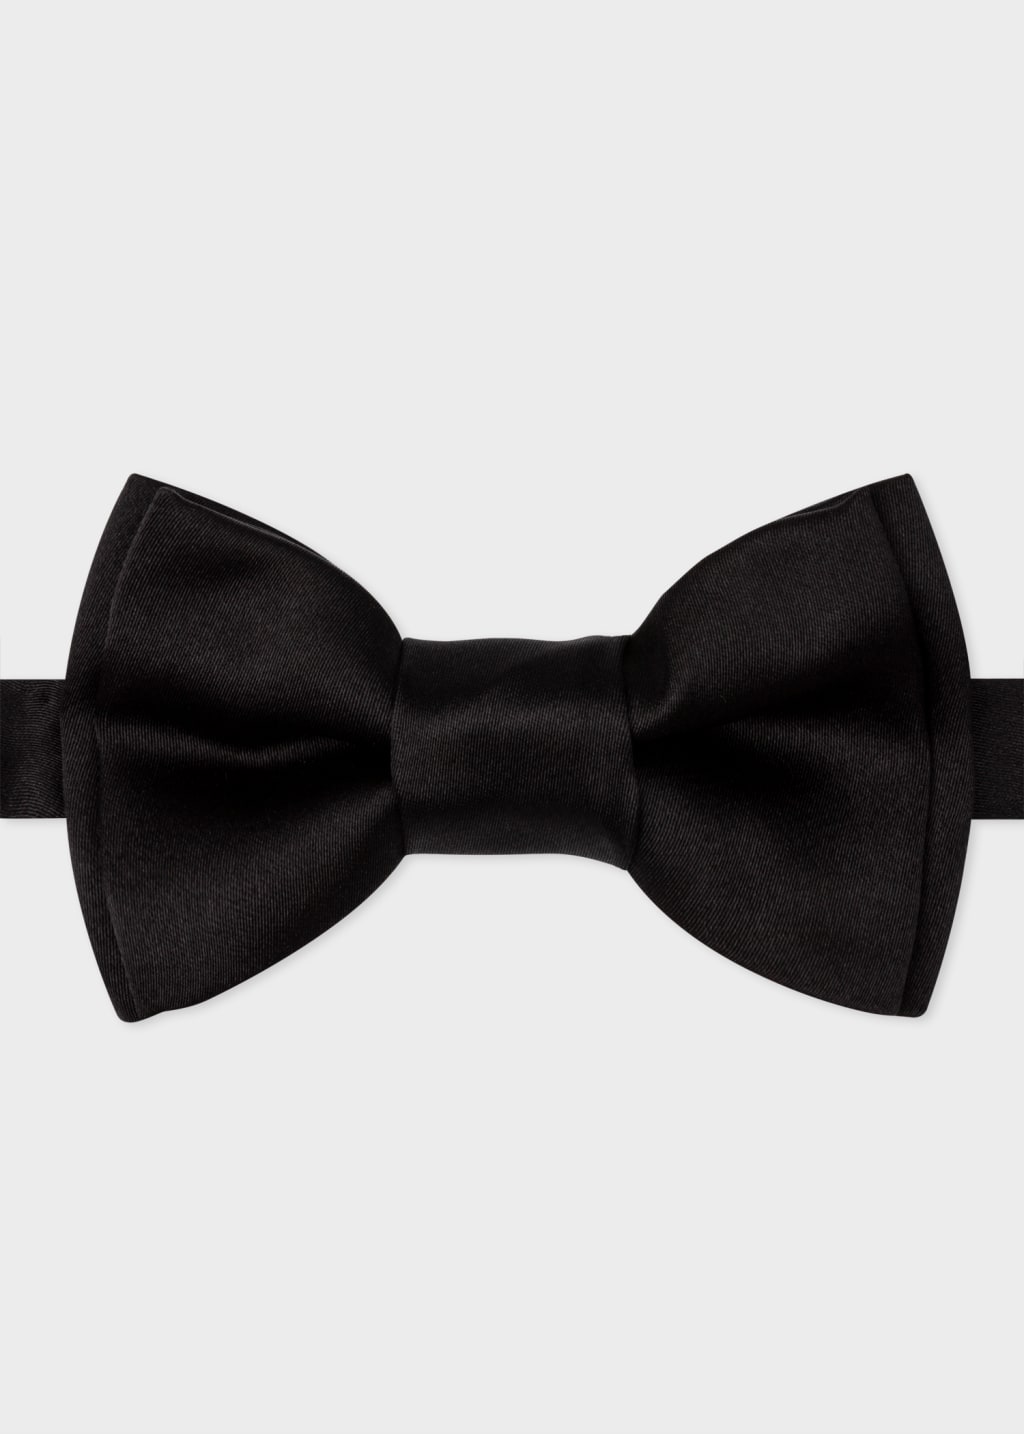 Front View - Black Pre-Tied Silk Bow Tie Paul Smith